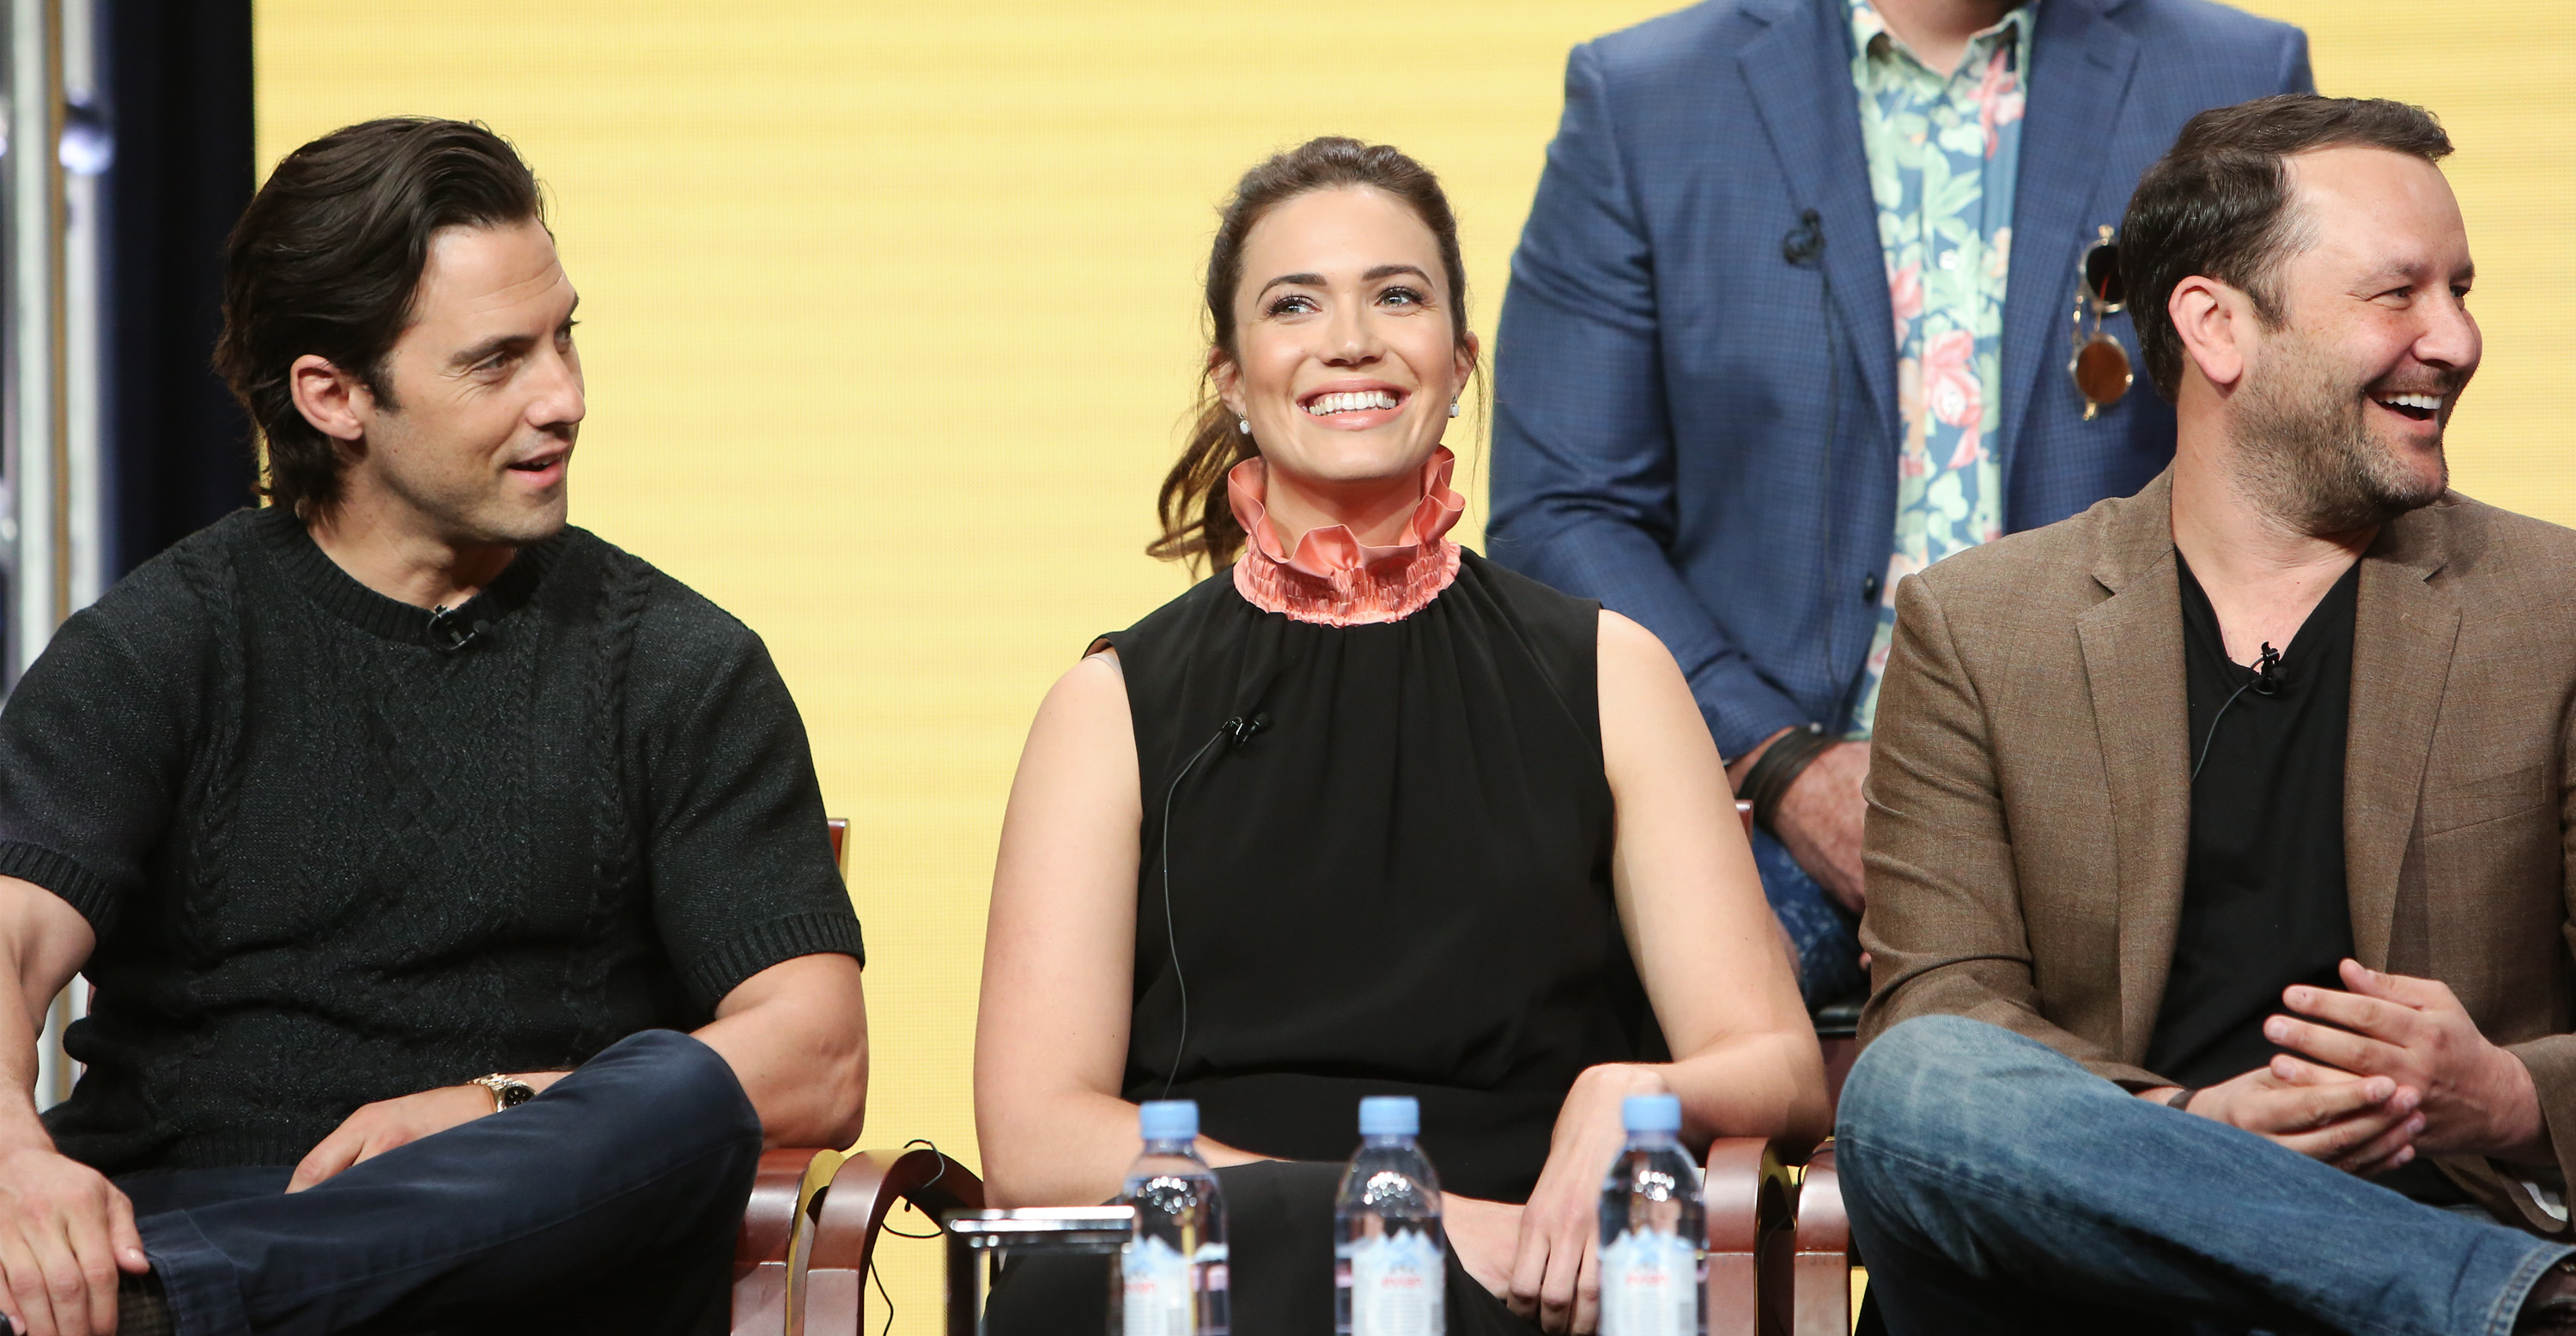 mandy-moore-this-is-us-panel-tca-summer-press-tour-los-angeles-august-3rd-2017-6.jpg